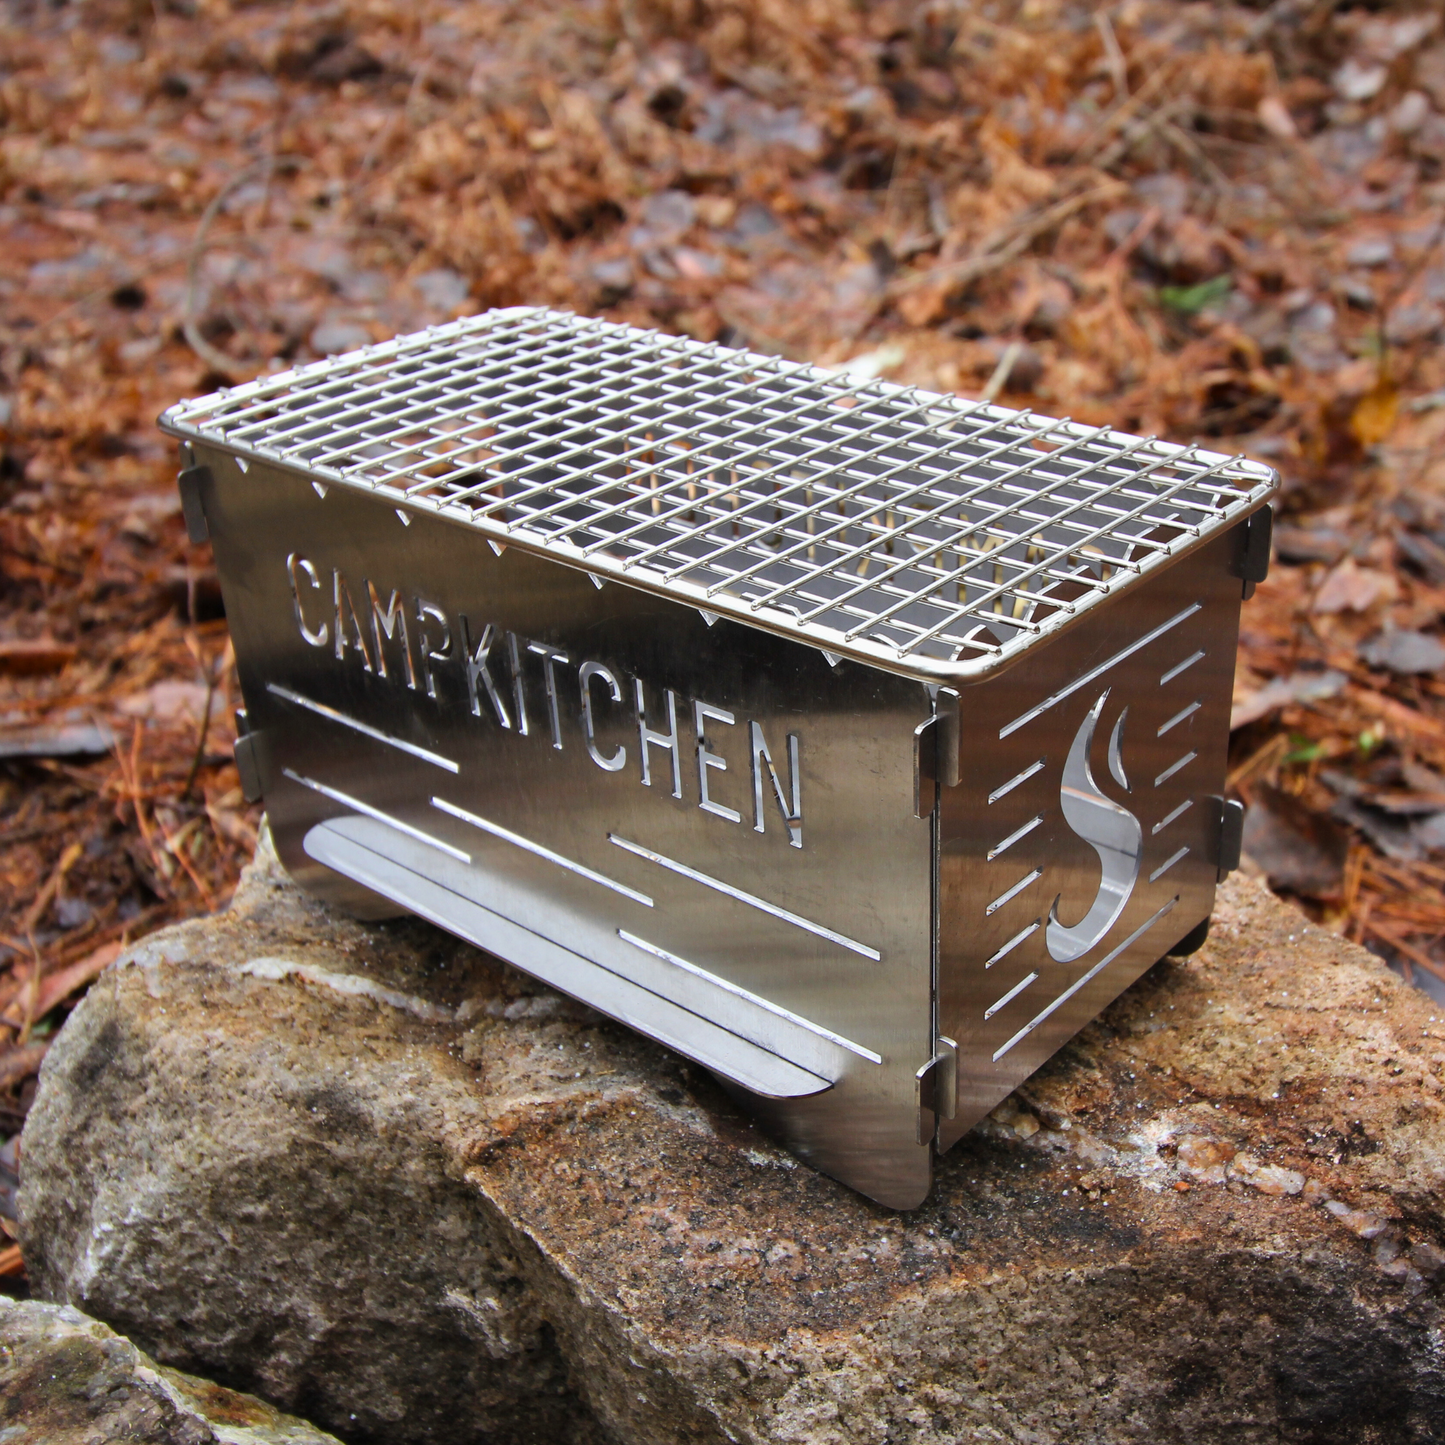 CAMPKITCHEN Twig Stove complete with the top grate on a rock.